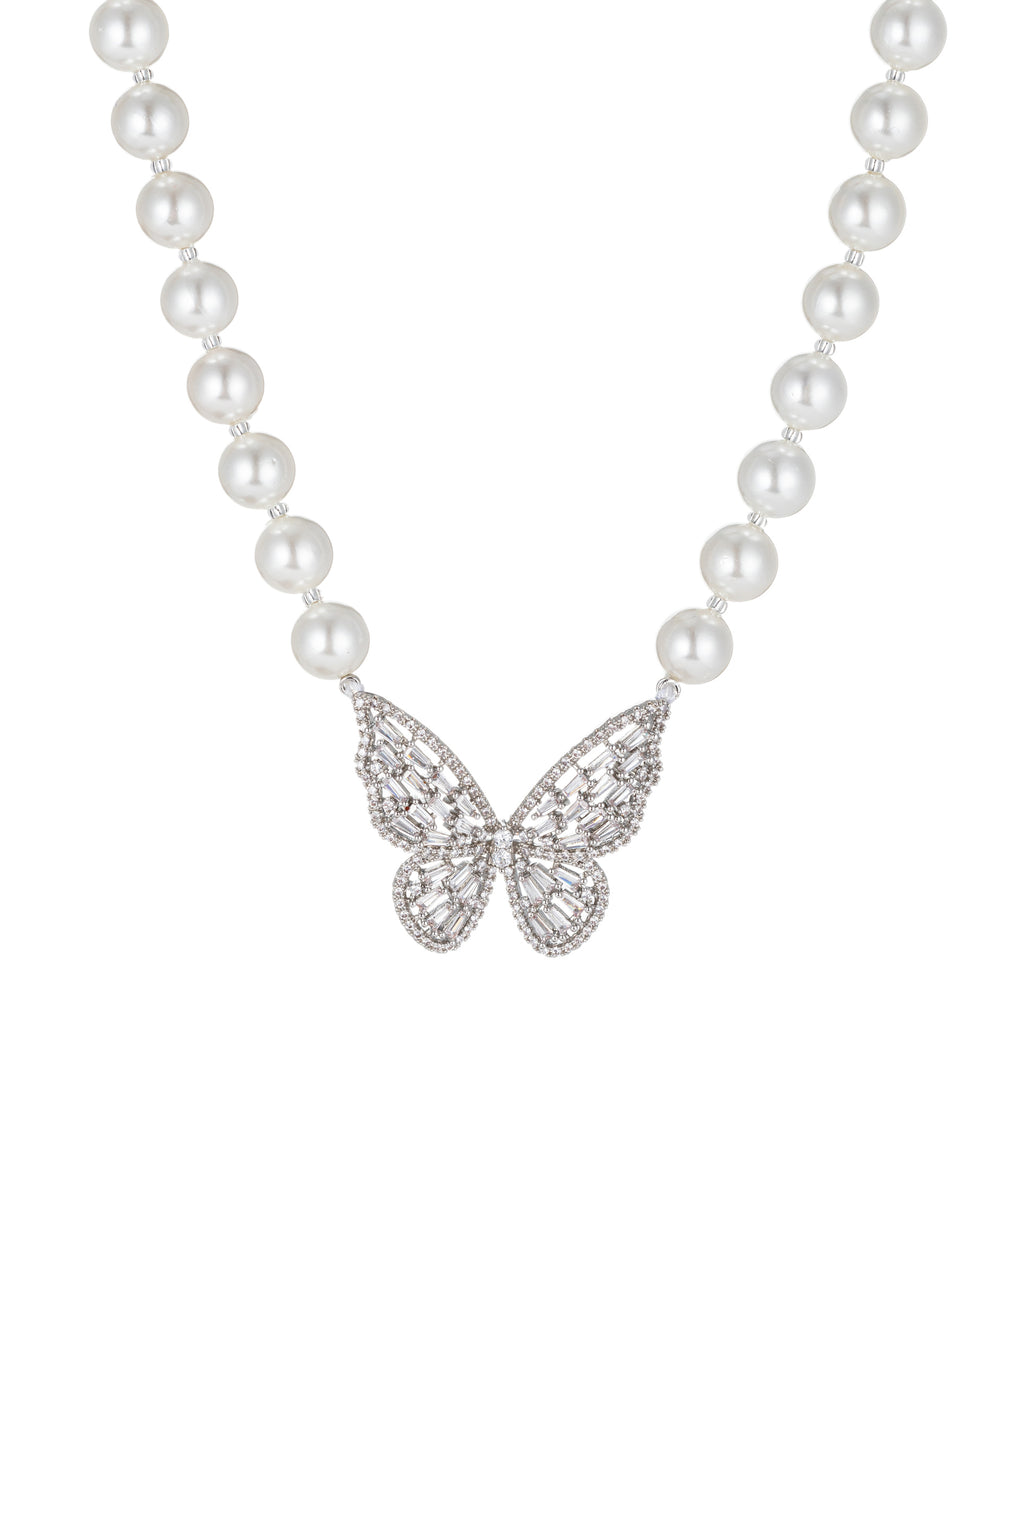 Butterfly shell pearl necklace with CZ crystals.